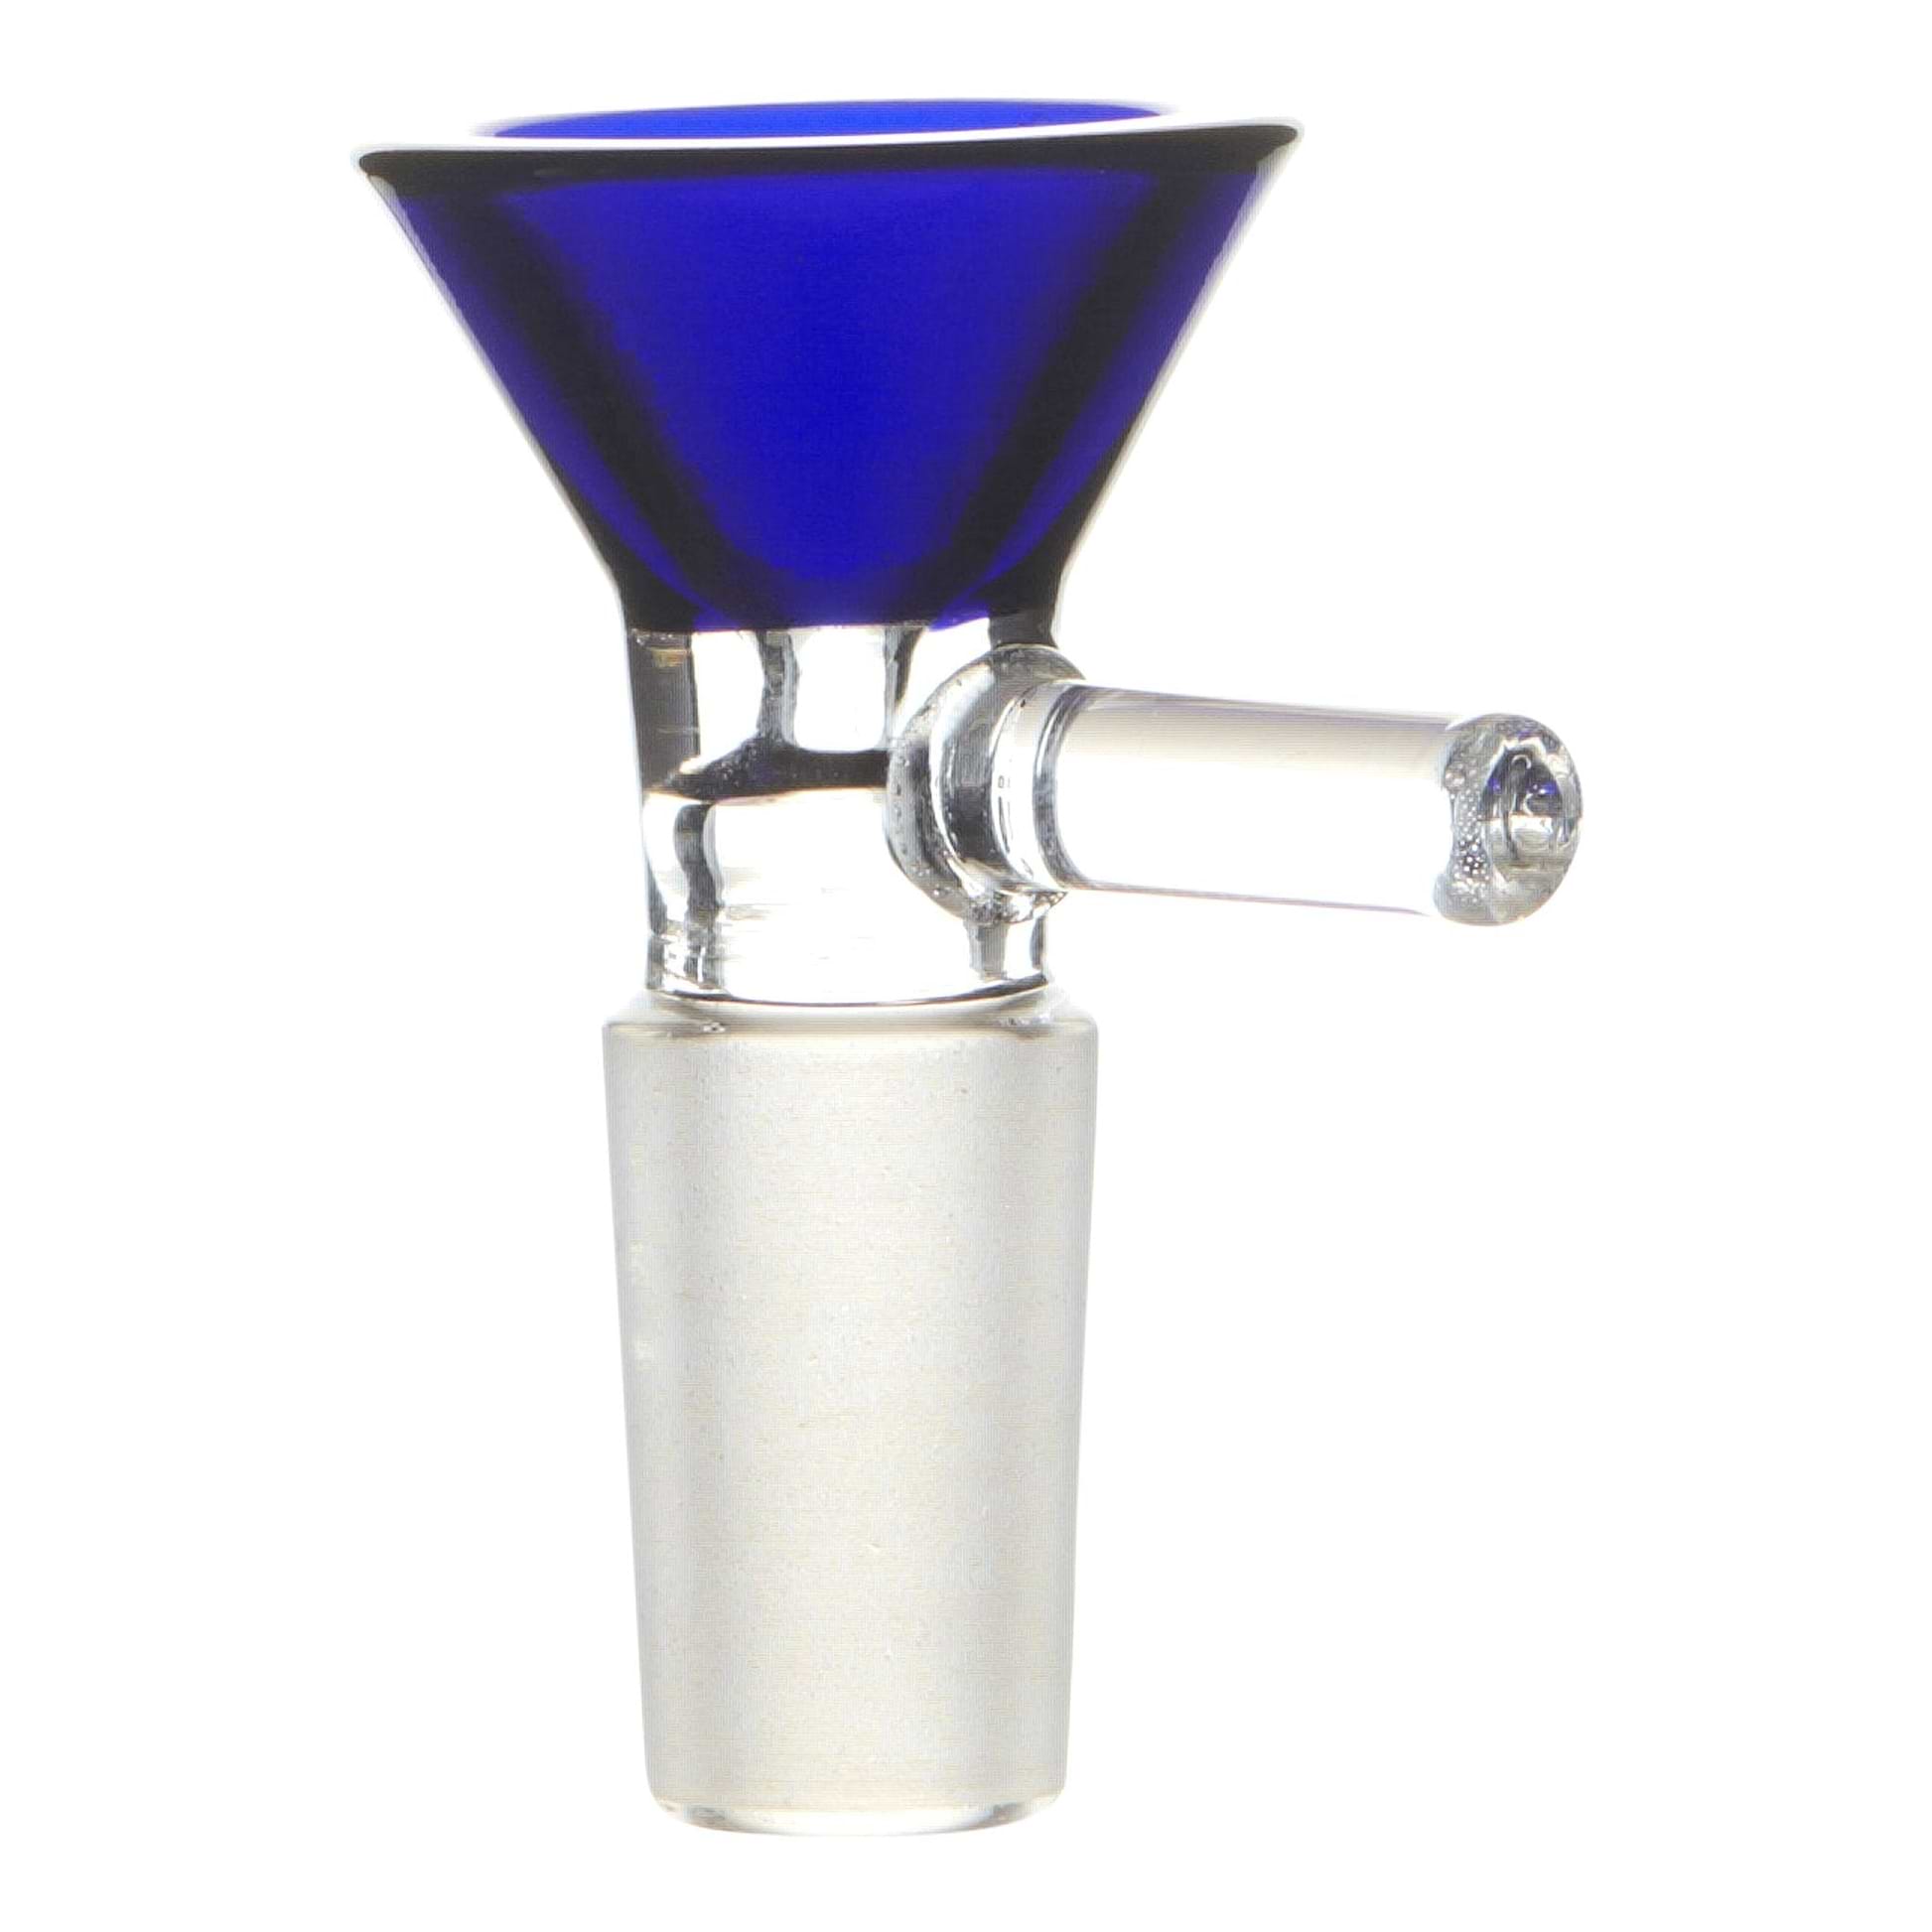 Full close up shot of glass 14mm male cone bowl bong part in blue color with handle facing right